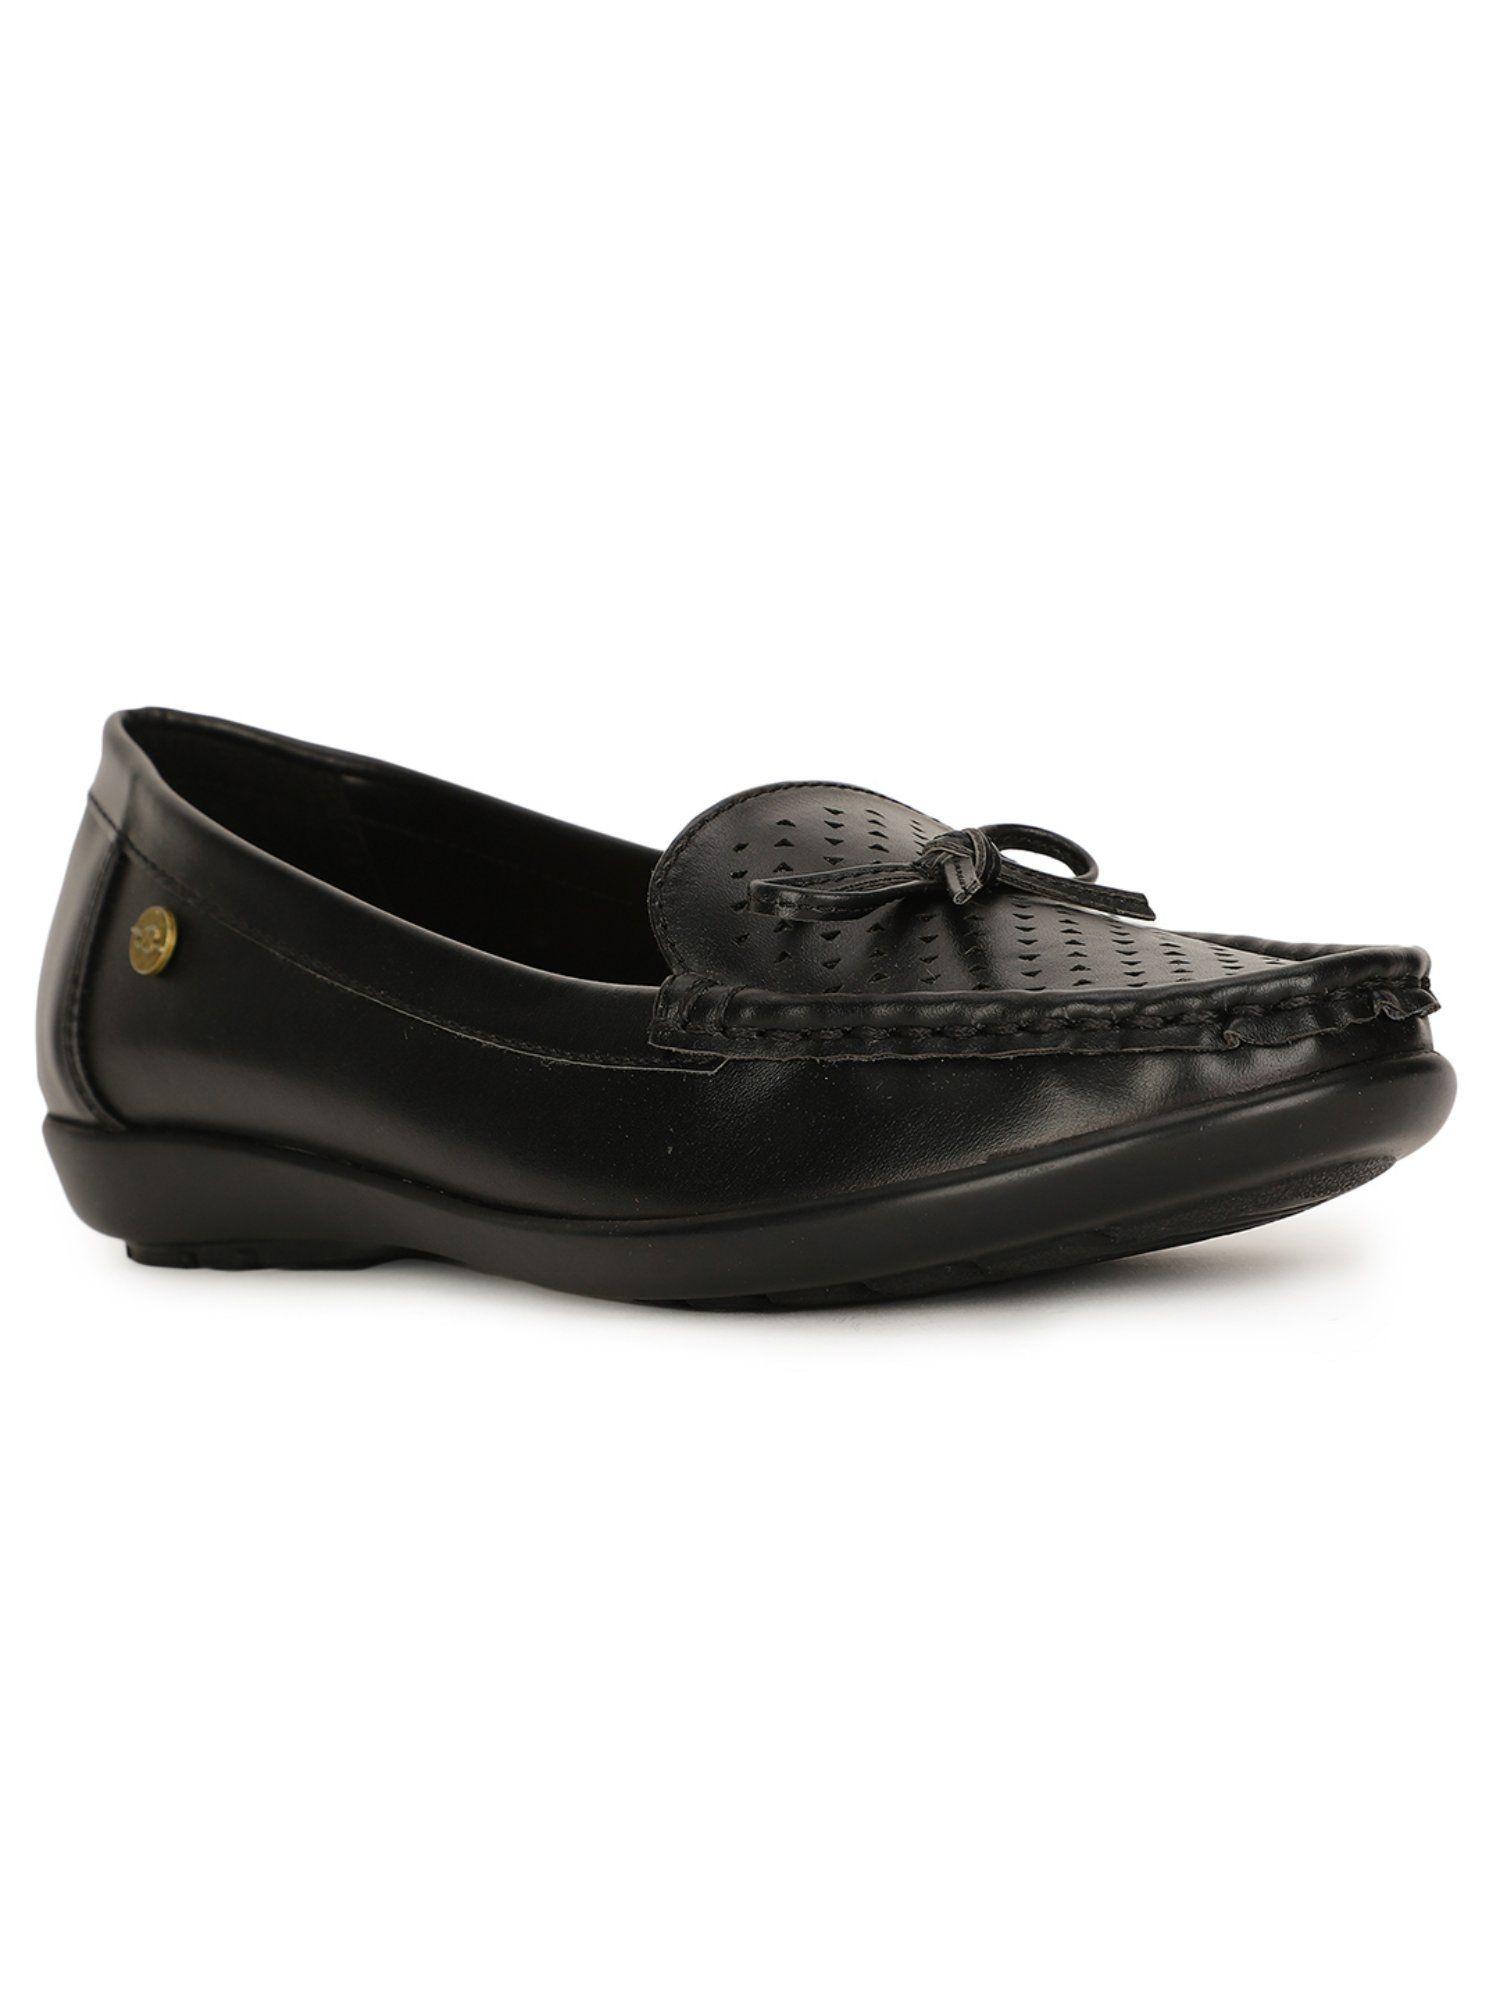 textured black loafers